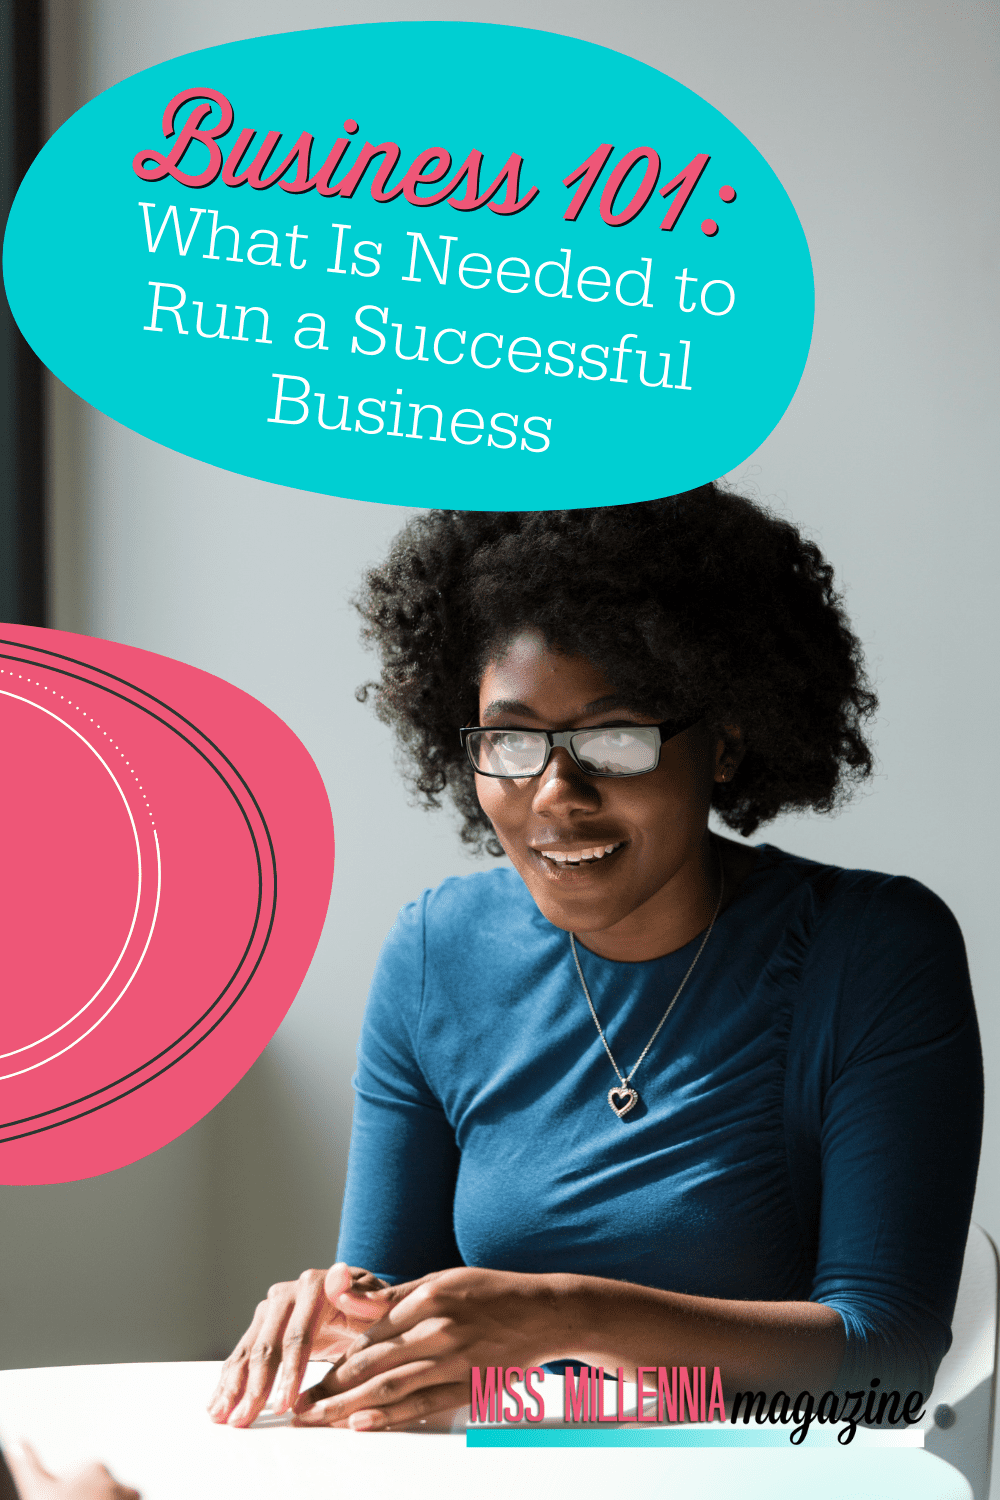 Business 101: What Is Needed to Run a Successful Business